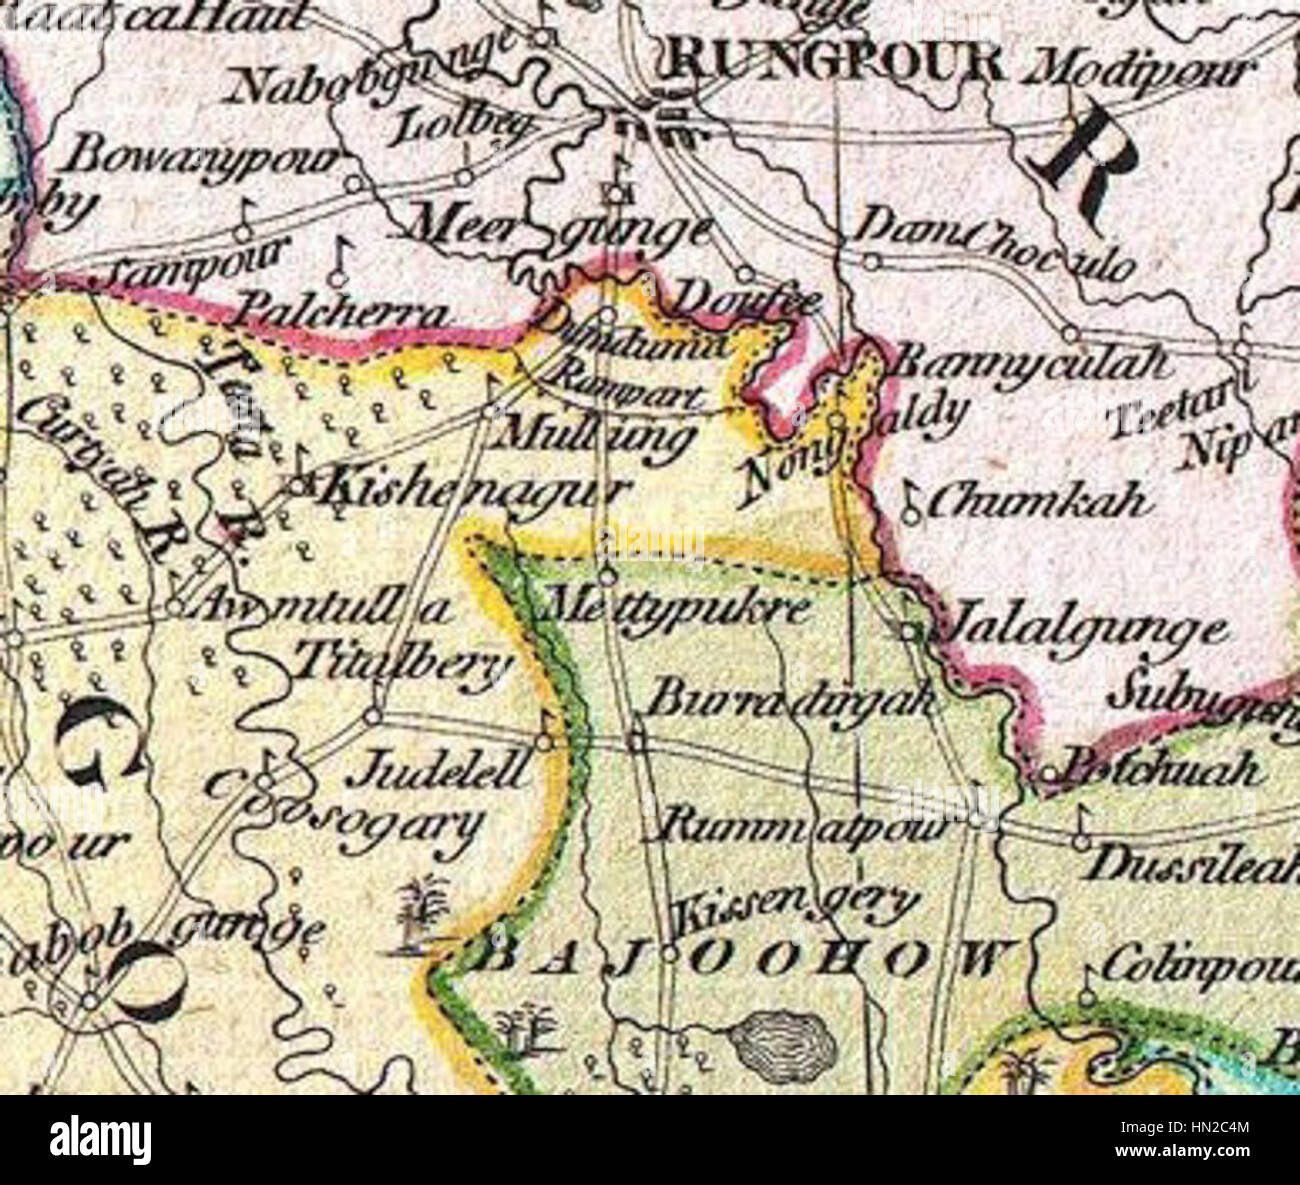 Mithapukur in the Dury Wall Map of Bihar and Bengal, India Stock Photo